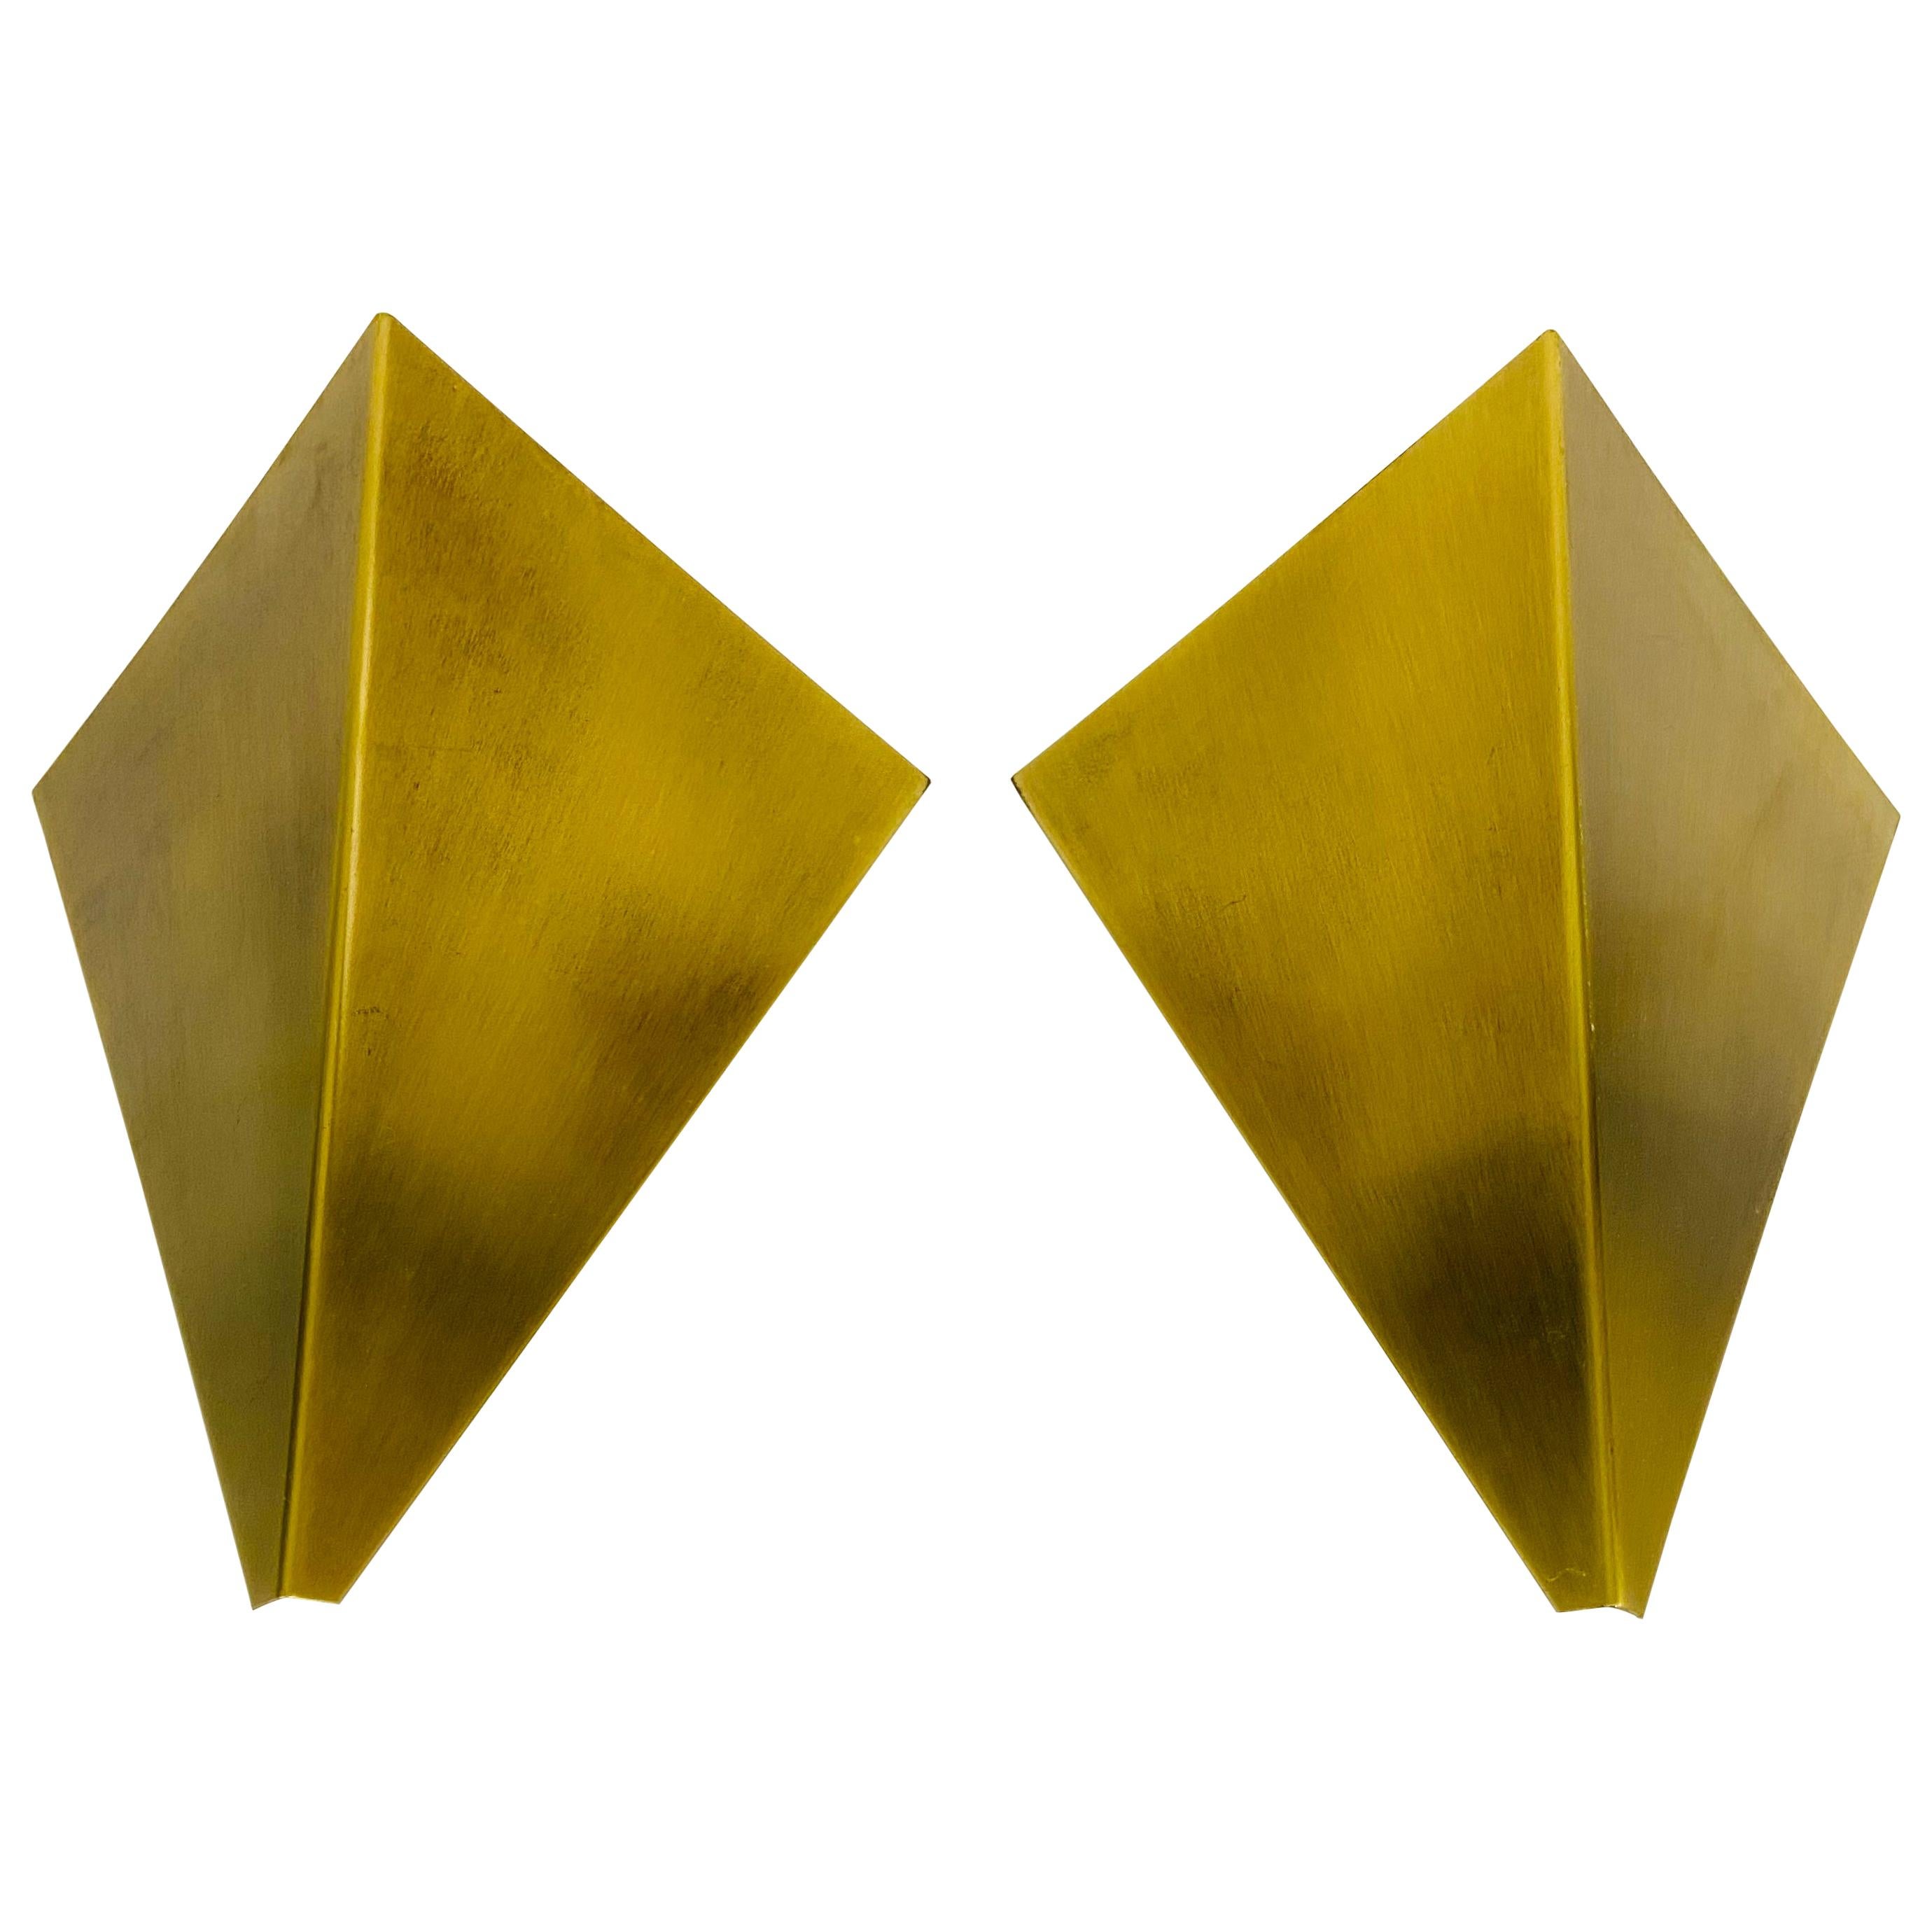 Pair of Extraordinary Triangle Brass Sconces by Bankamp, Germany, 1960s